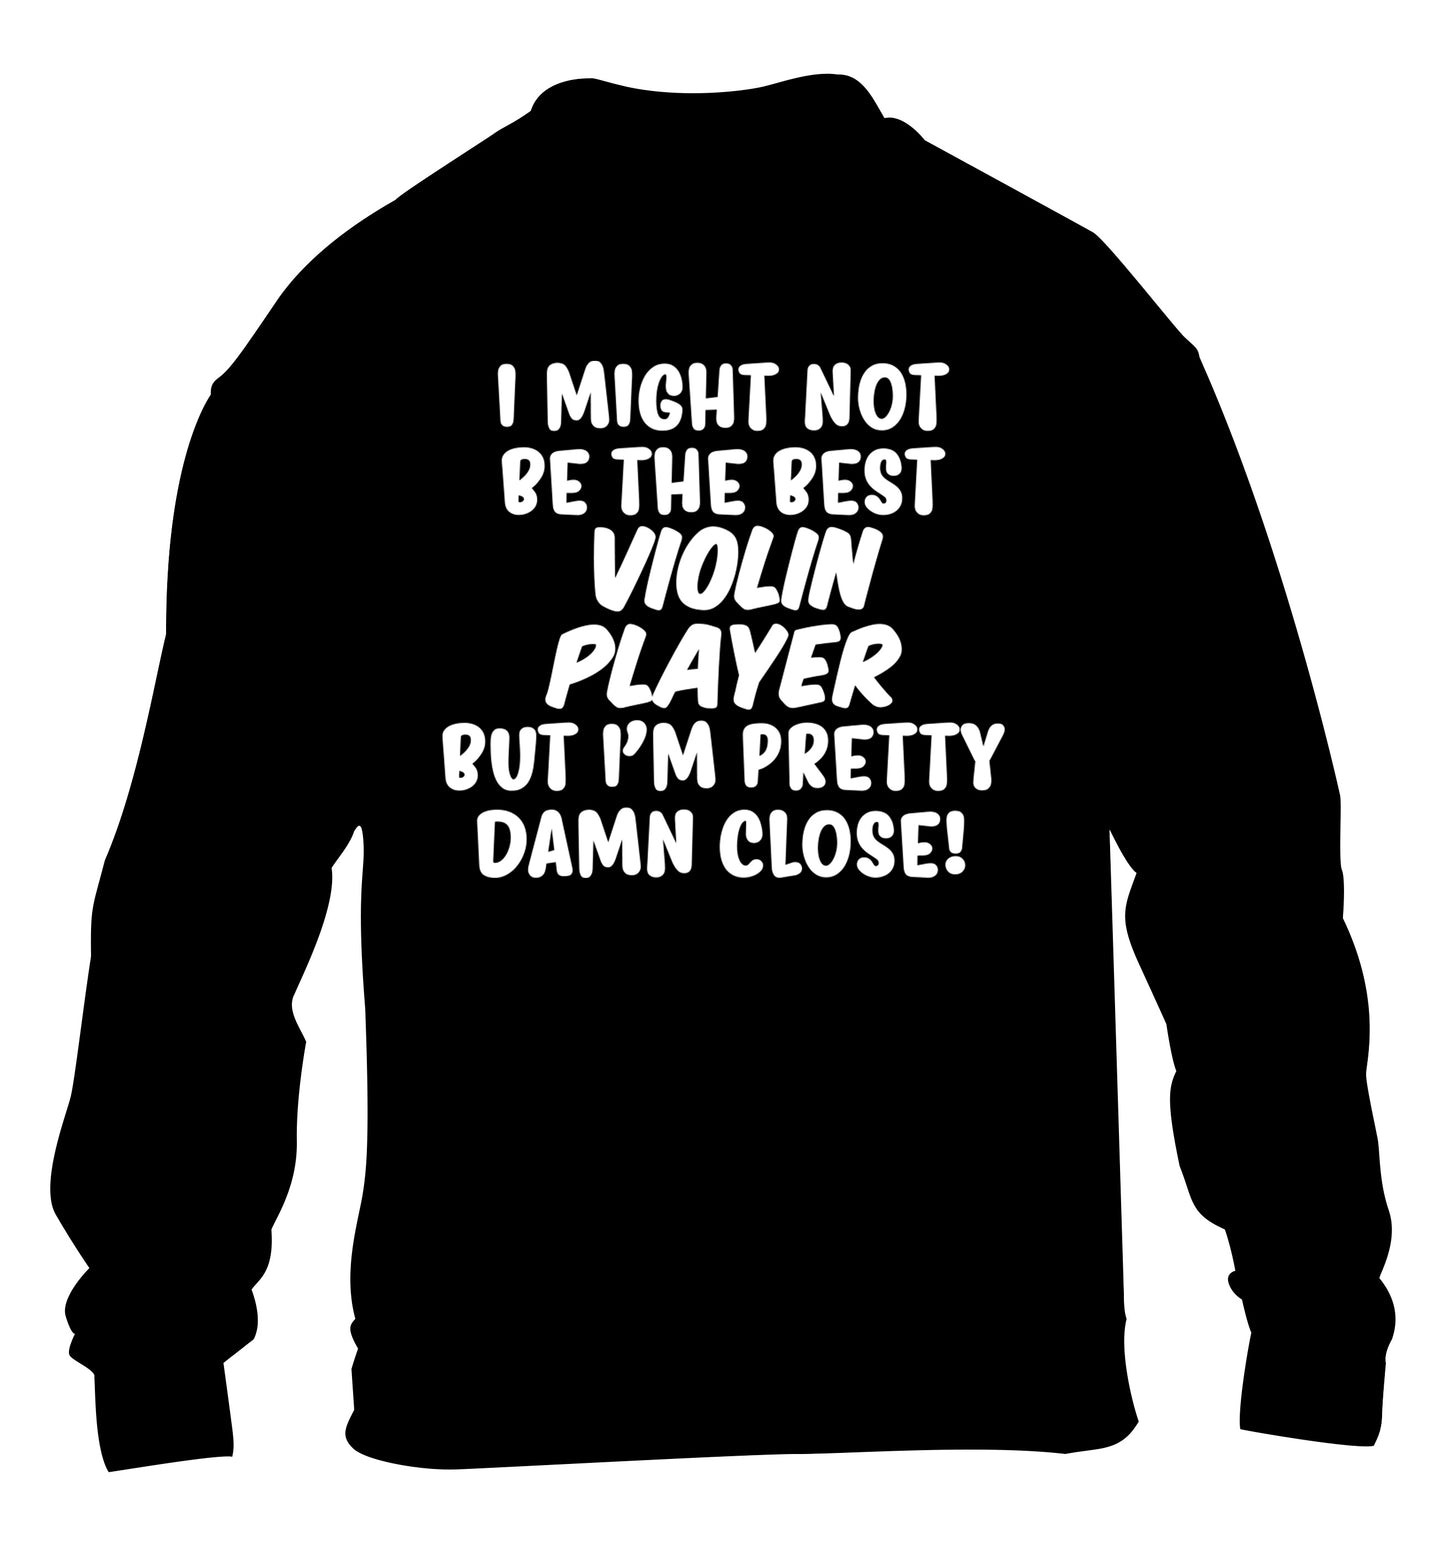 I might not be the best violin player but I'm pretty close children's black sweater 12-13 Years